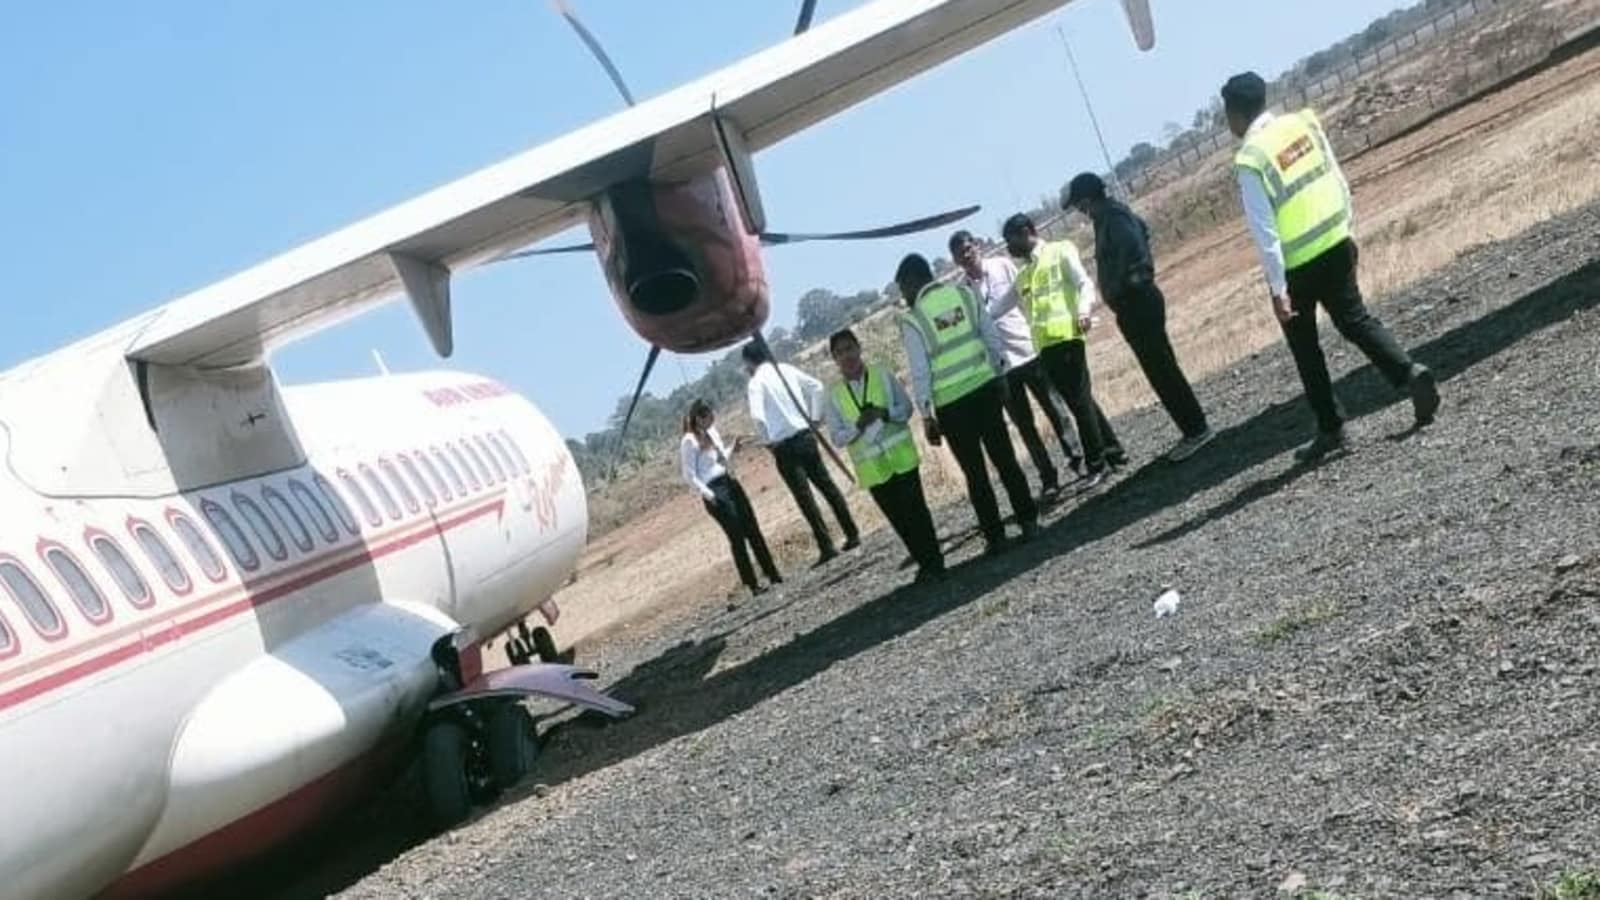 Jabalpur runway excursion: DGCA suspends licences of two pilots for a year